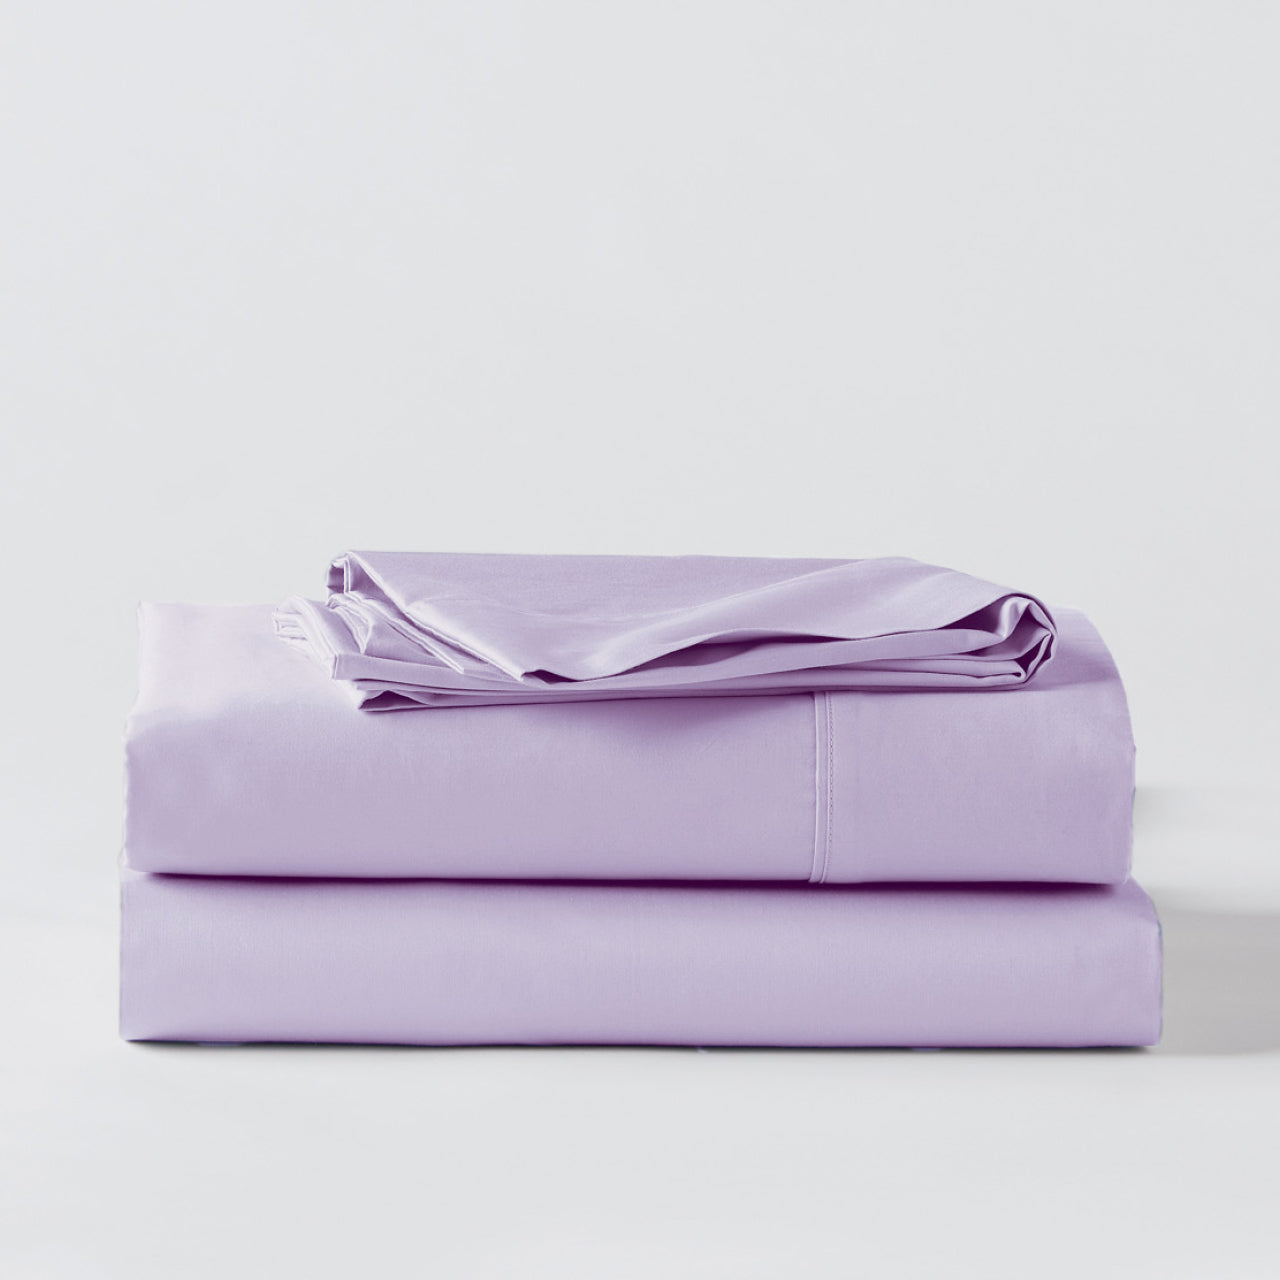 Premium Percale Violet Sheets folded up on floor